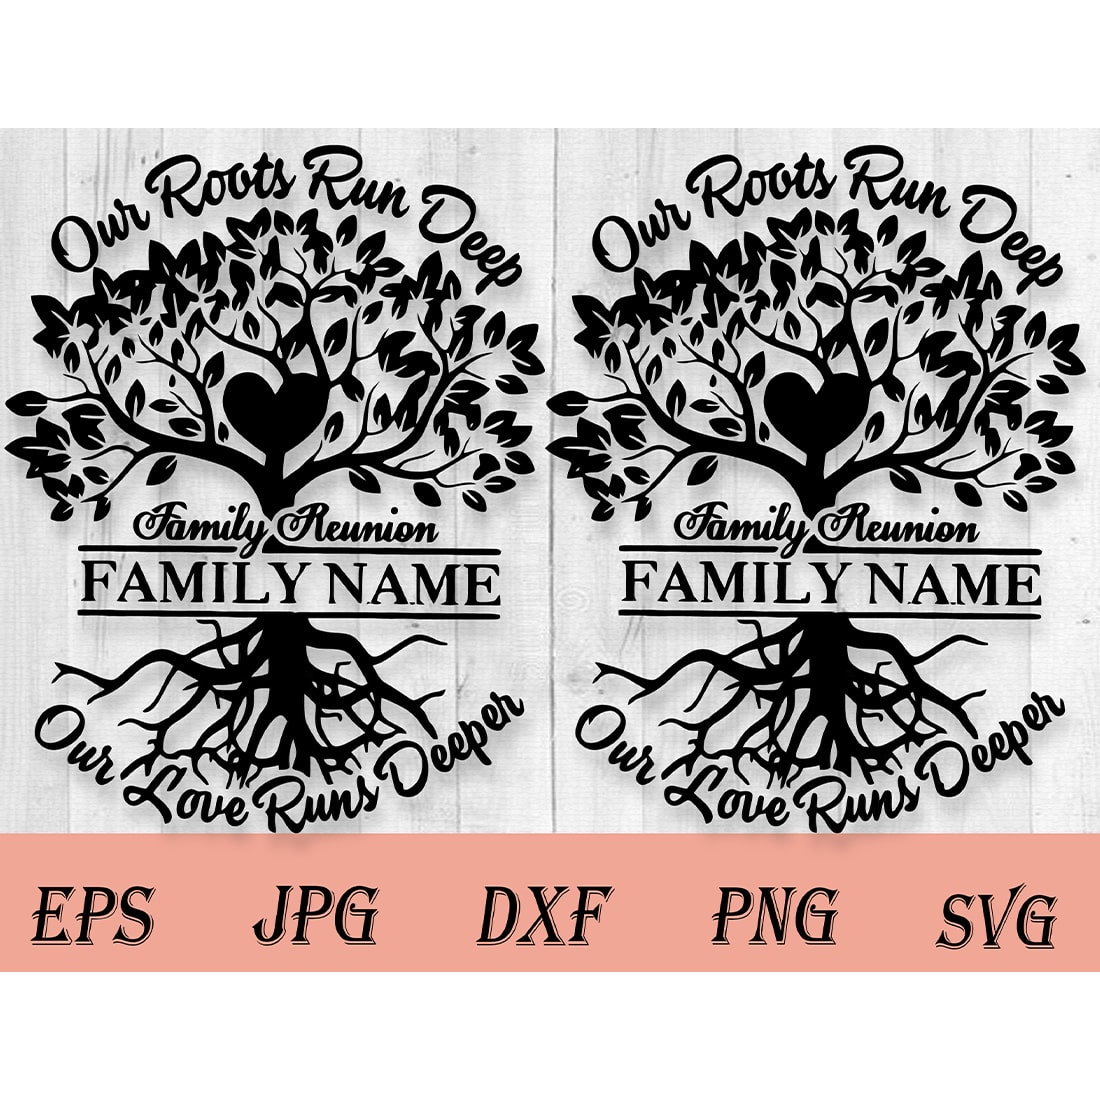 Family Reunion Svg Png| We've Shaken the Family Tree The Nuts are Gathering| DIY Personalized Family Name| Funny 2023 Family Matching Gifts cover image.